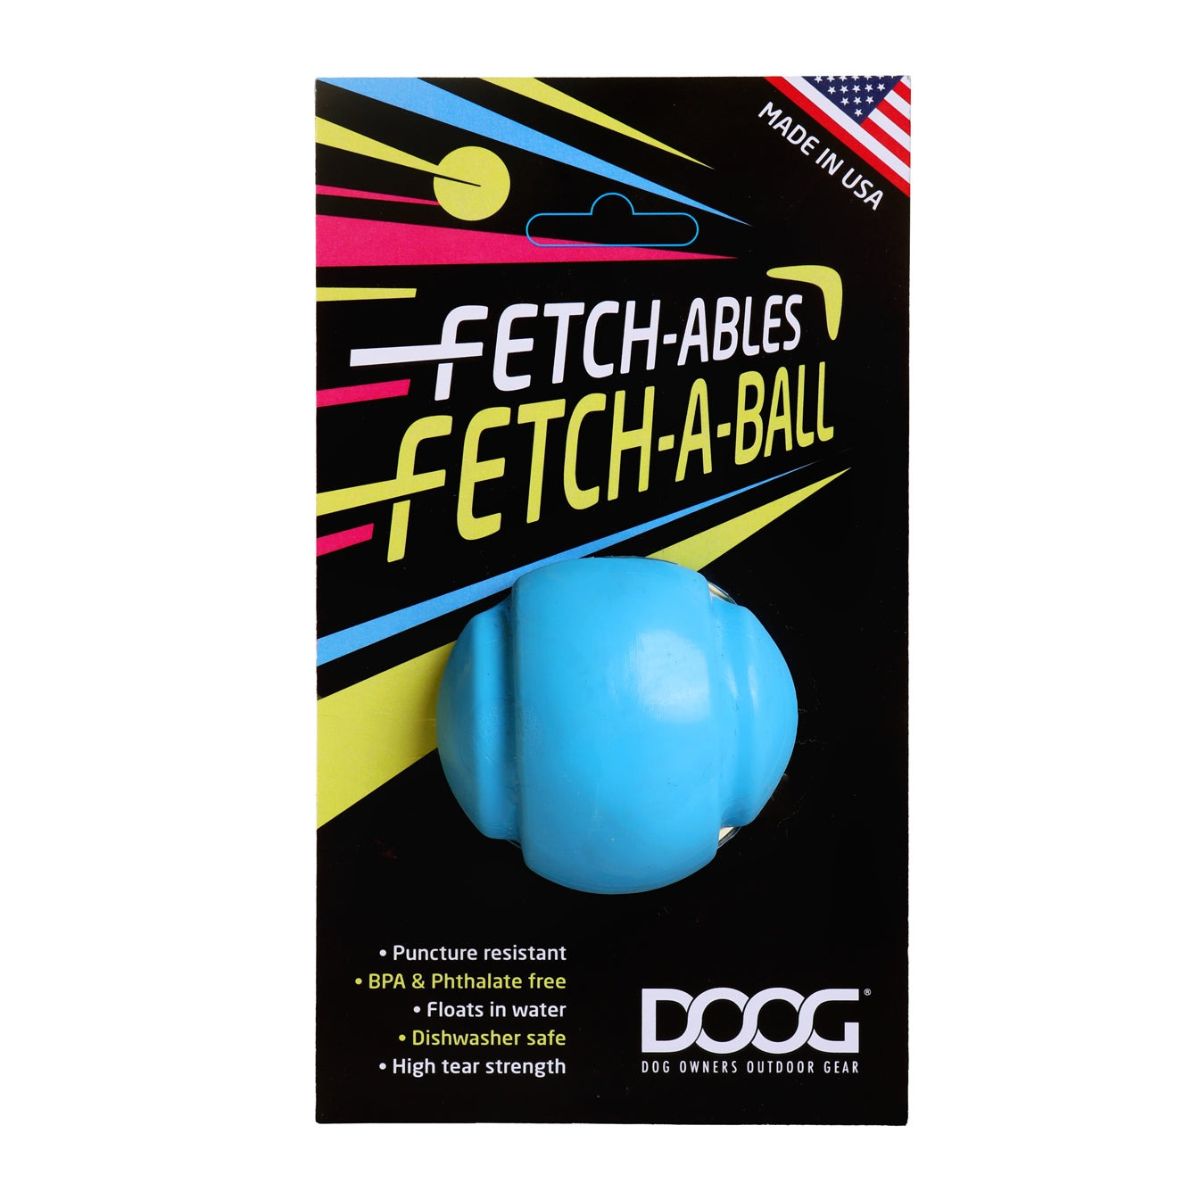 DOOG Pet Products Fetch-ables Fetch-A-Ball Dog Toy